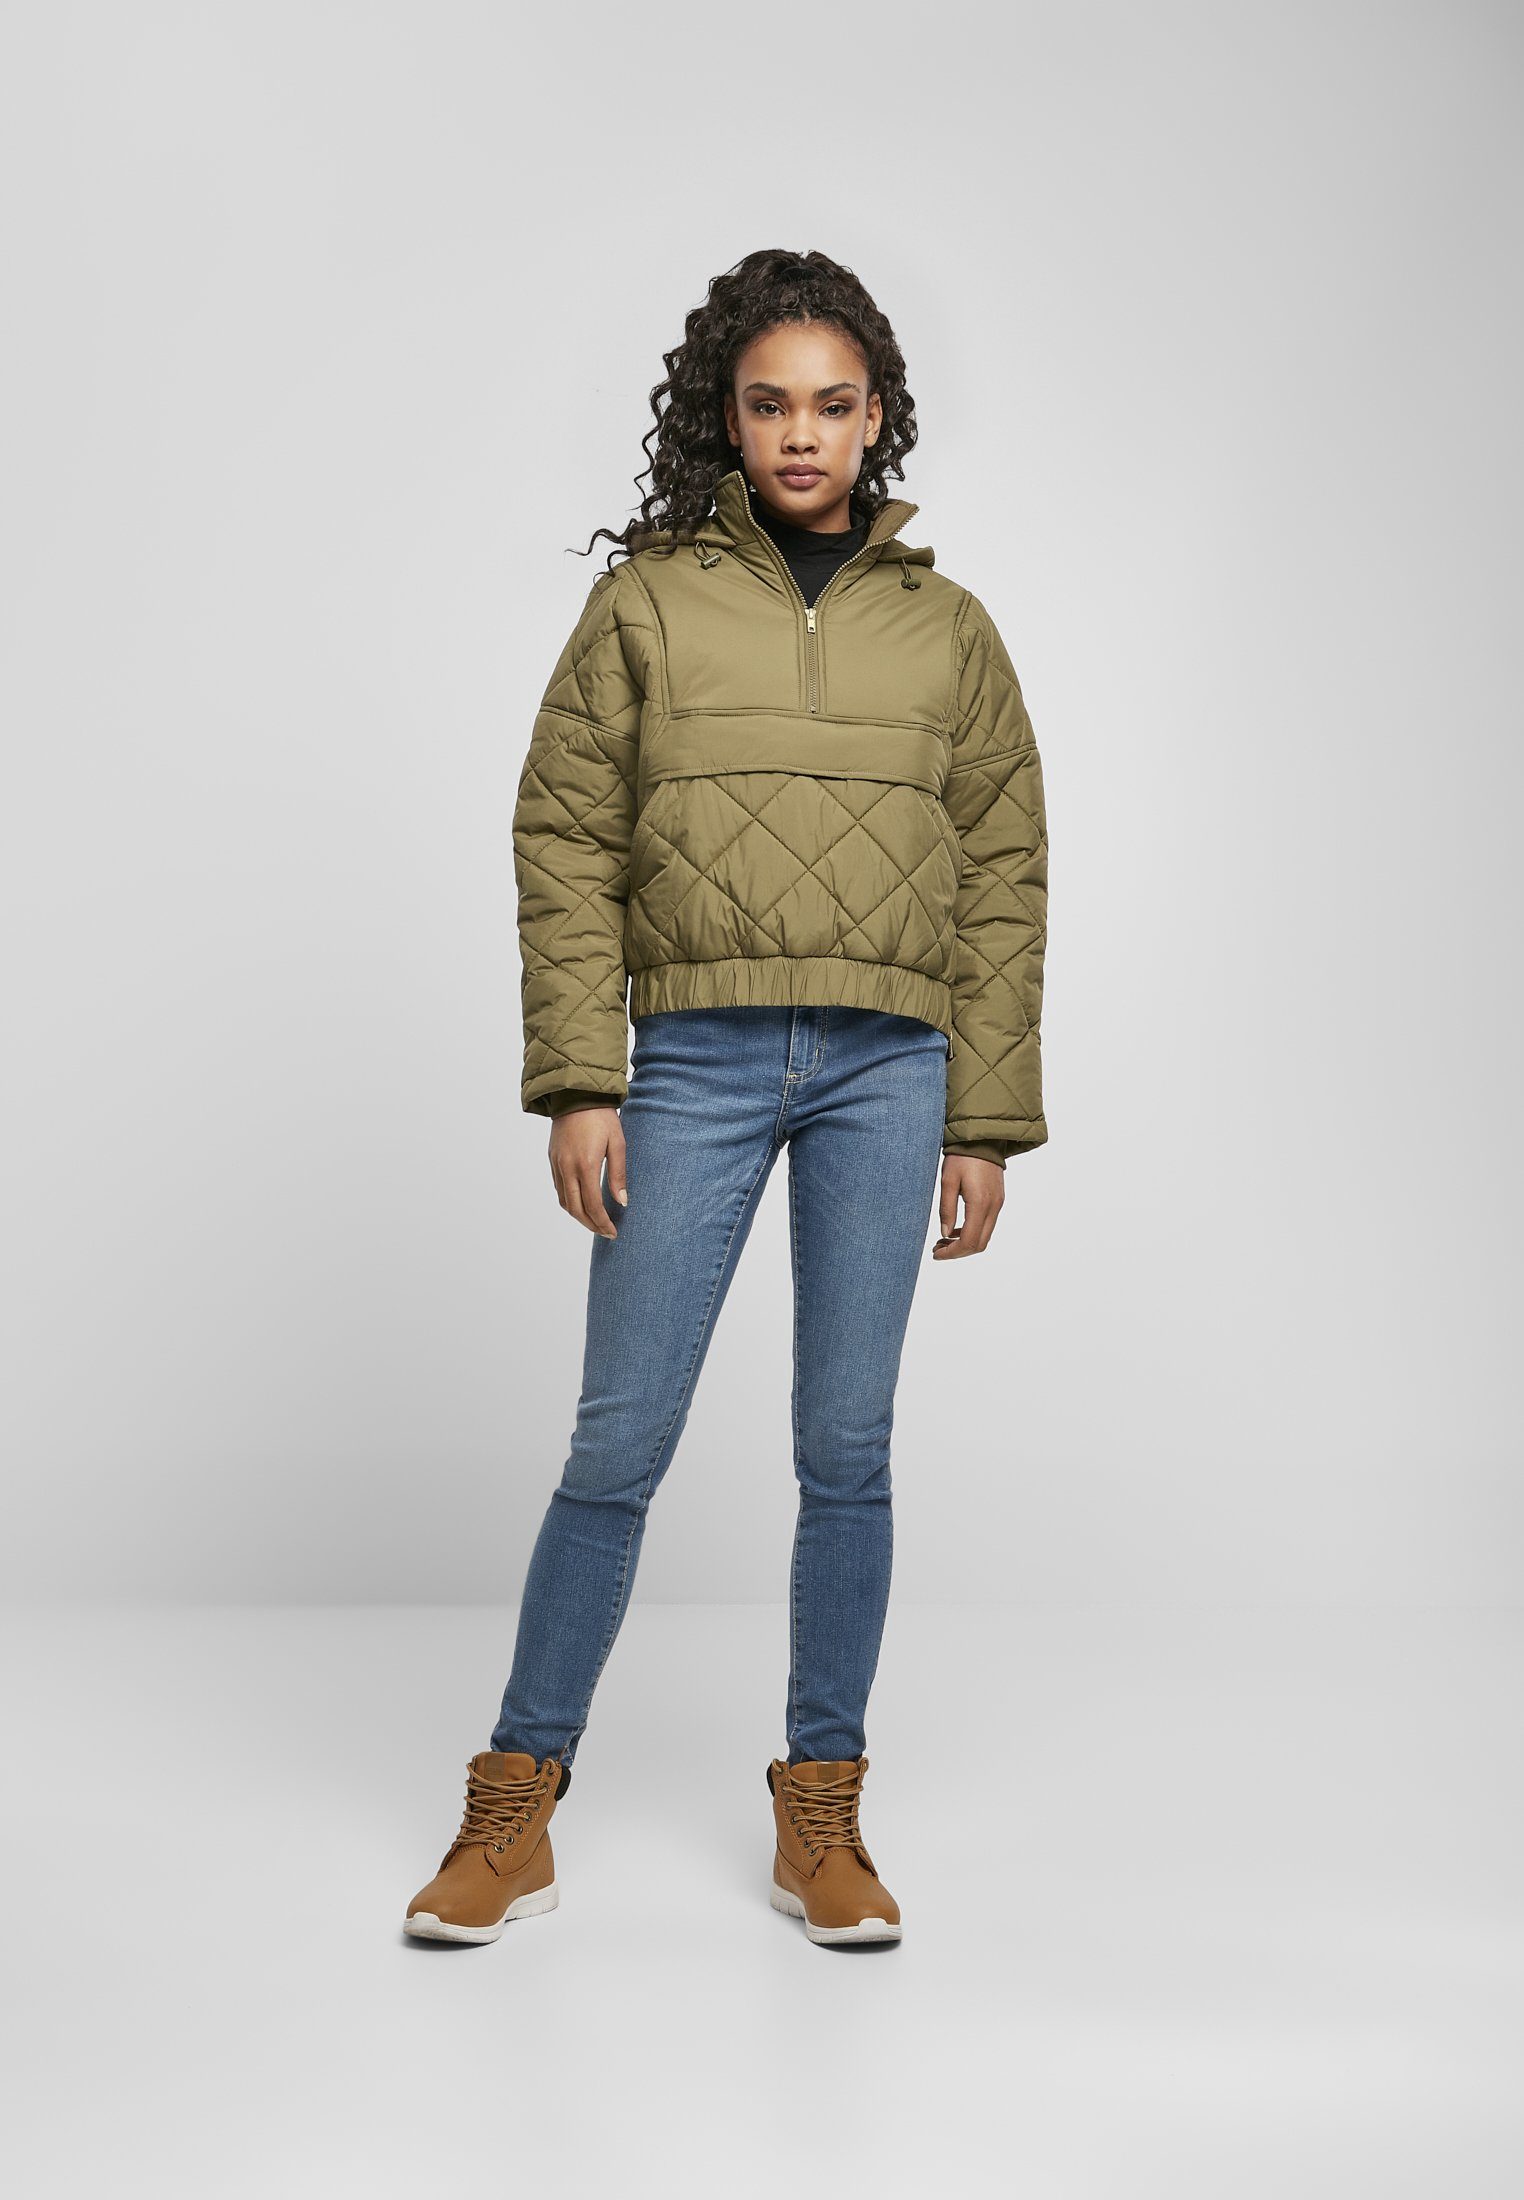 Oversized tiniolive Over CLASSICS Ladies Pull Diamond Damen Winterjacke Jacket (1-St) URBAN Quilted